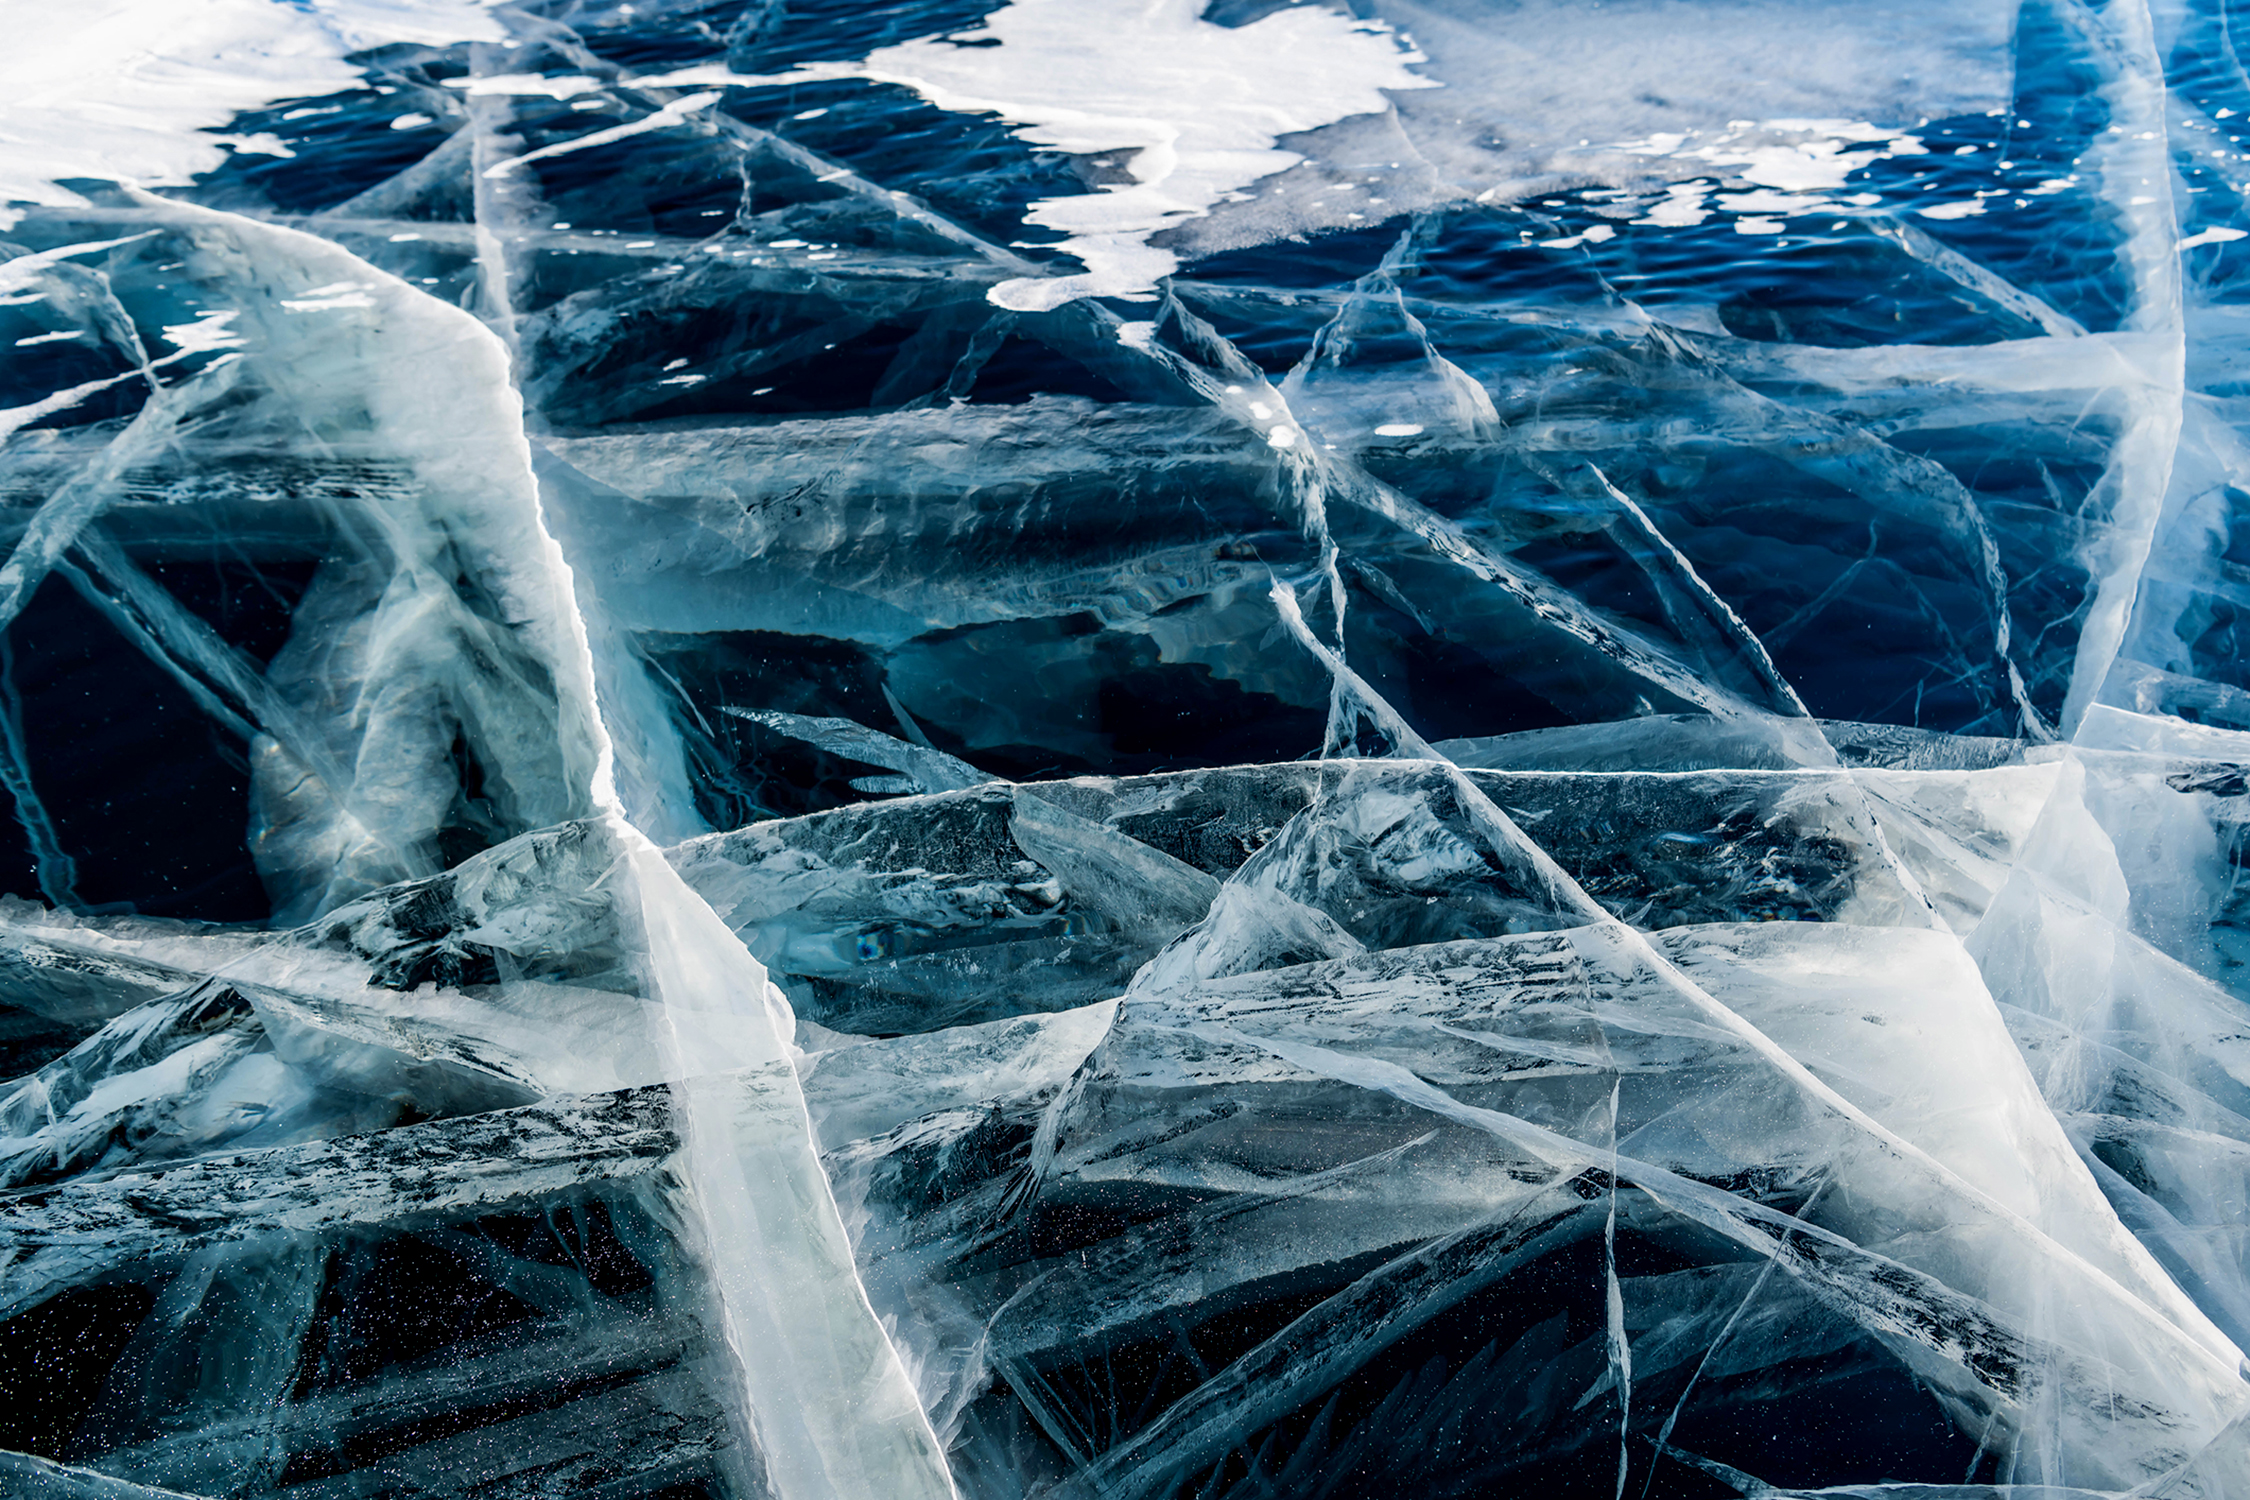 Great Drives: Ice driving on Lake Baikal in a Mazda CX-5: DEEP FREEZE Beautiful patterns form in the ice on Lake Baikal, the world's largest body of fresh water by volume